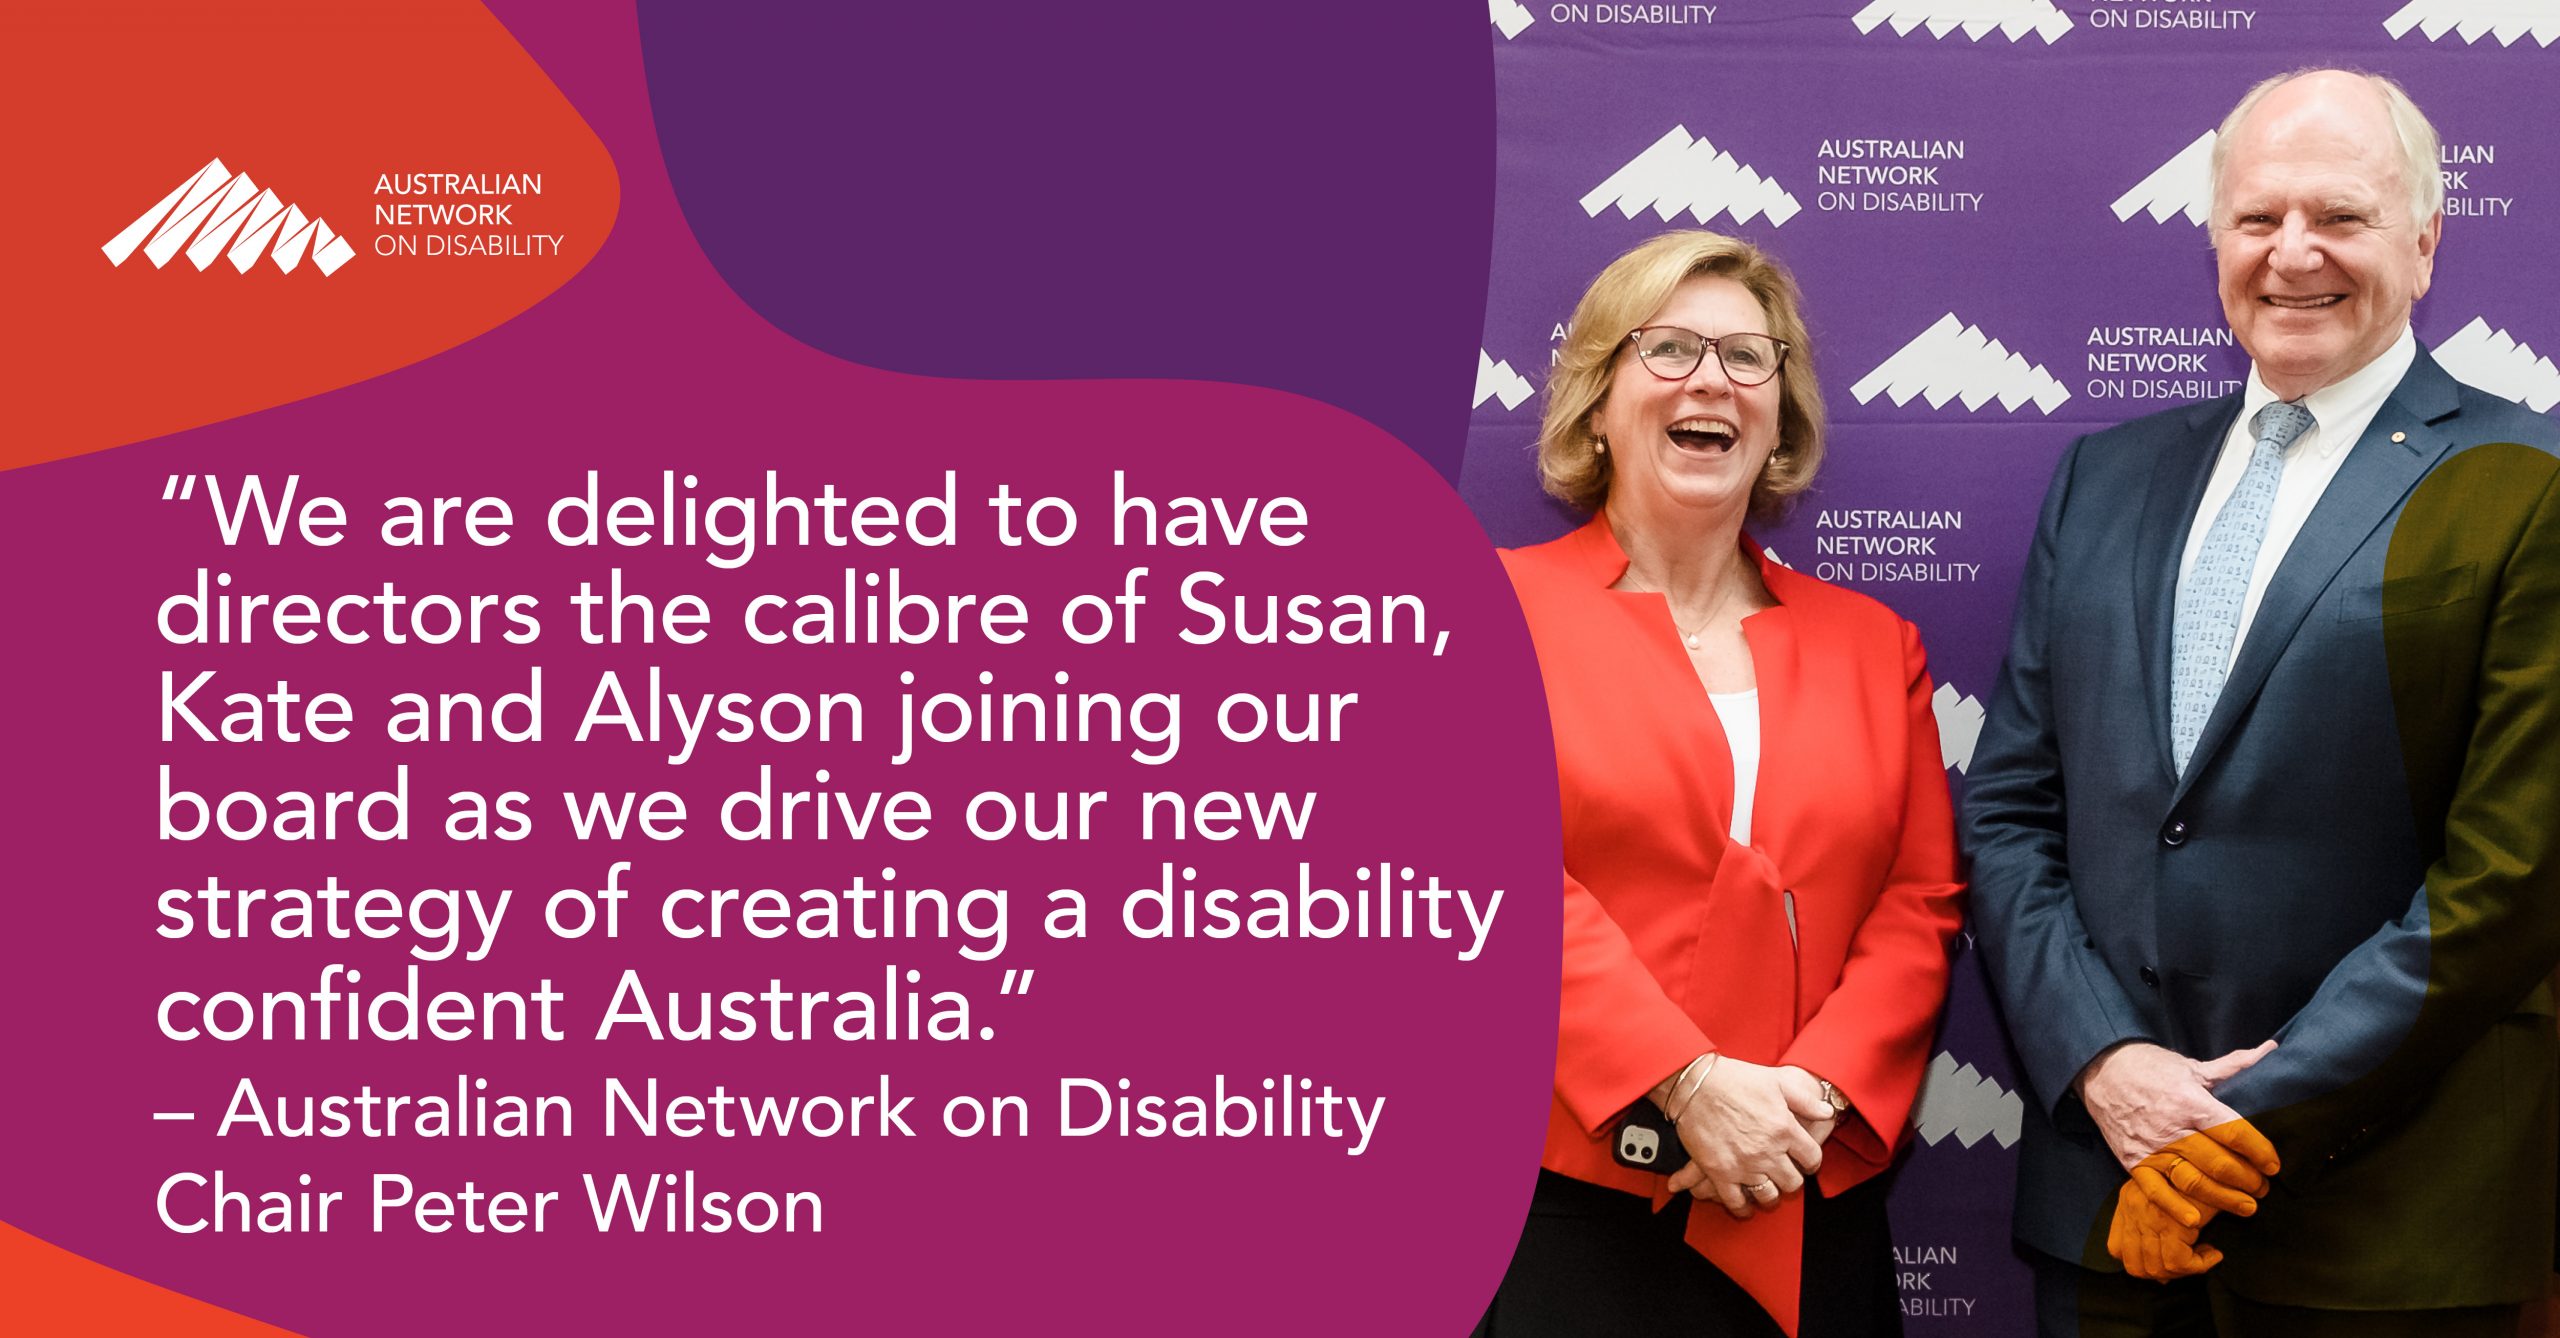 "We are delighted to have directors the calbire of Susan, Kate and Alyson joining our board as we drive our new strategy of creating a disability confident Australia." Australian Network on Disability Chair Peter Wilson AM said. With image of our CEO Corene Strauss GAICD and Peter Wilson smiling.